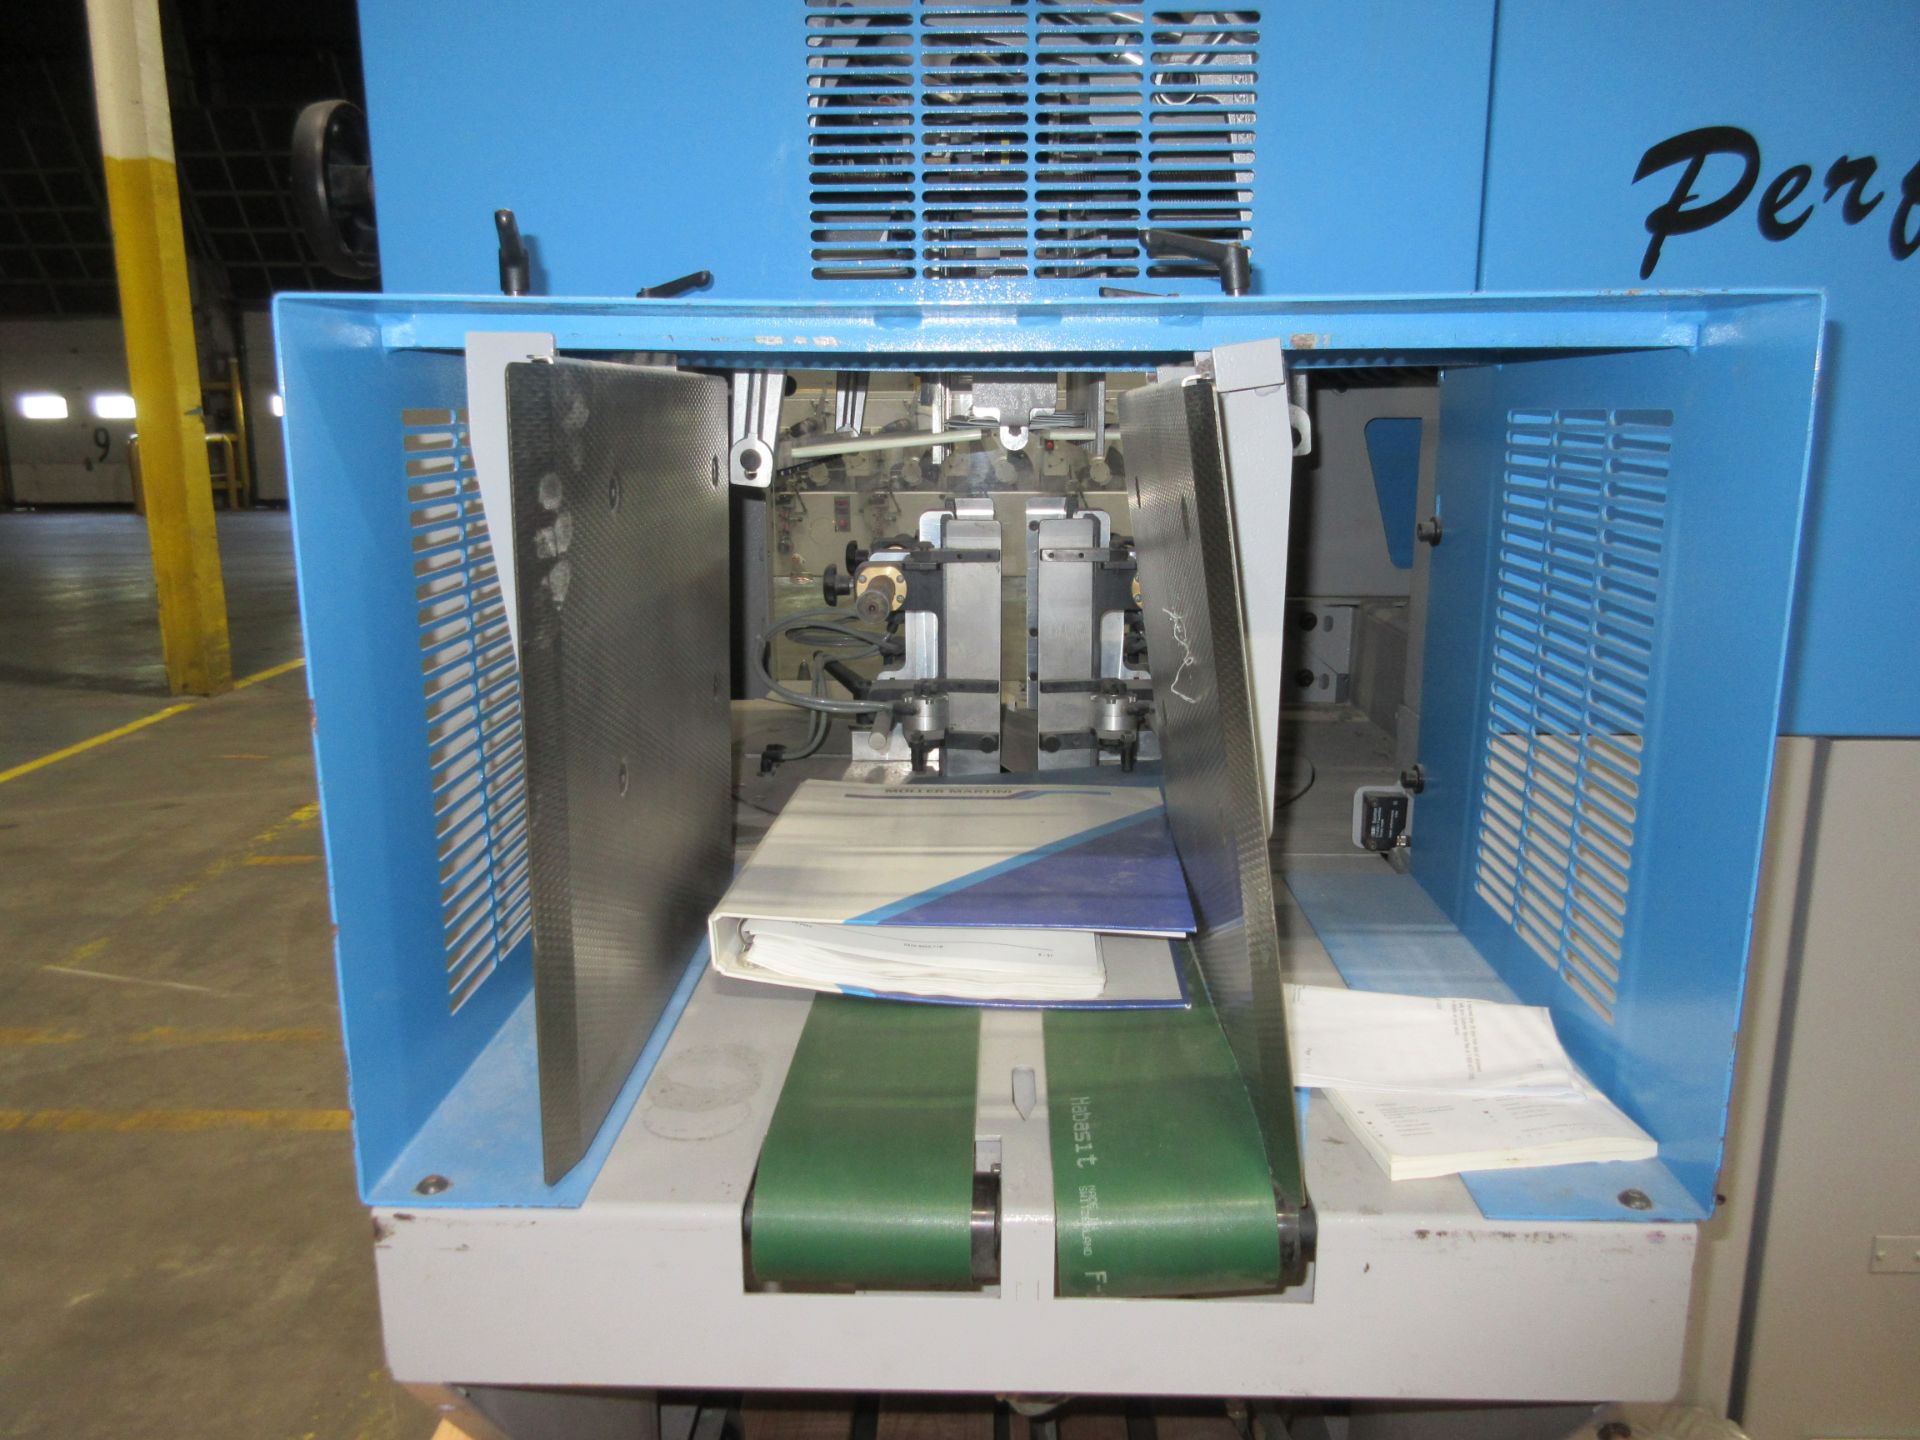 2007 Muller Perfetto md. 450.0400 counter stacker (LOCATED IN MILFORD, MA) - Image 9 of 9